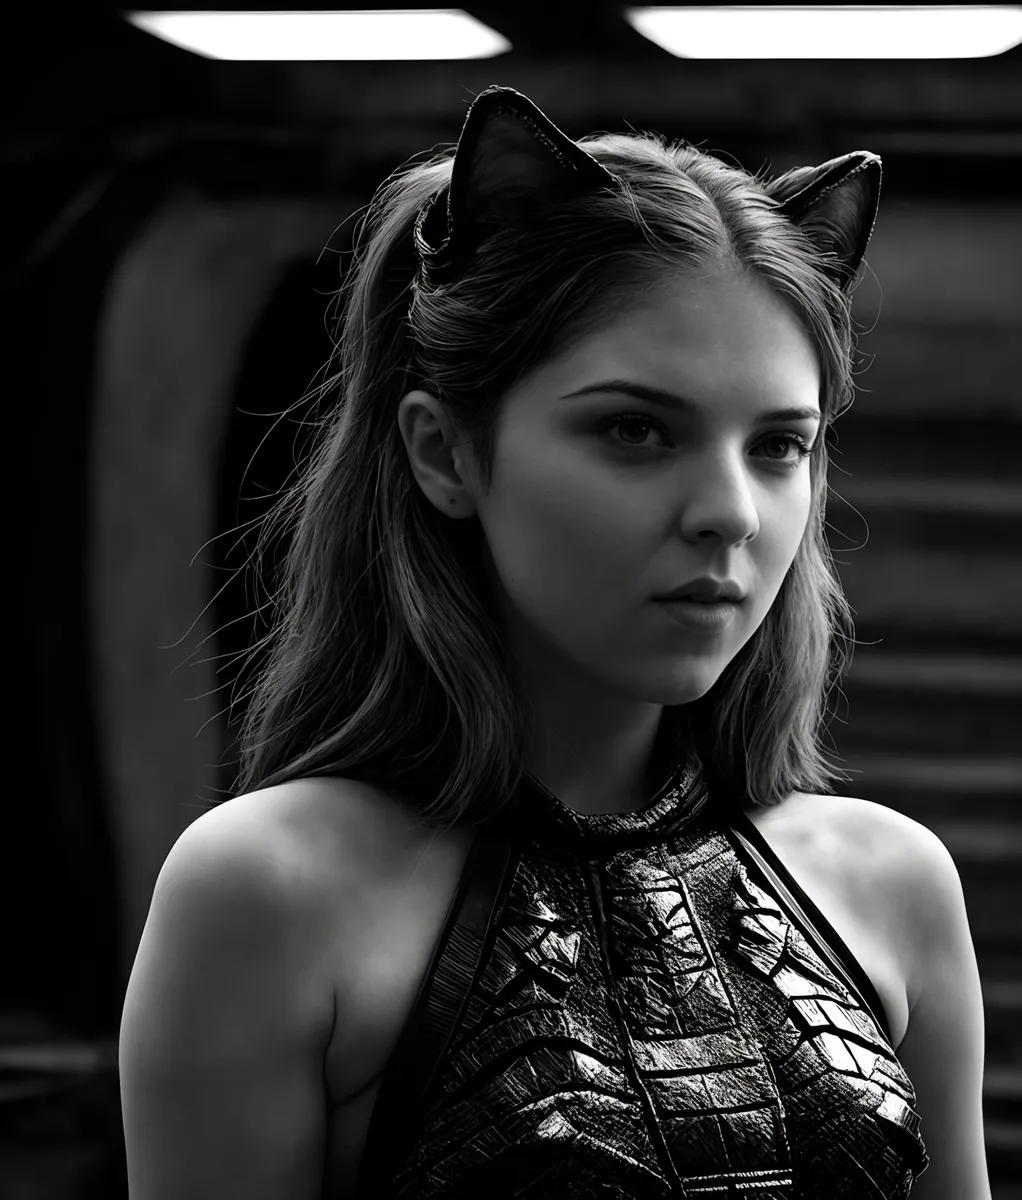 A black and white portrait of a young woman with long hair, wearing a sleeveless dark textured dress and cat ears headband. AI generated image using Stable Diffusion.